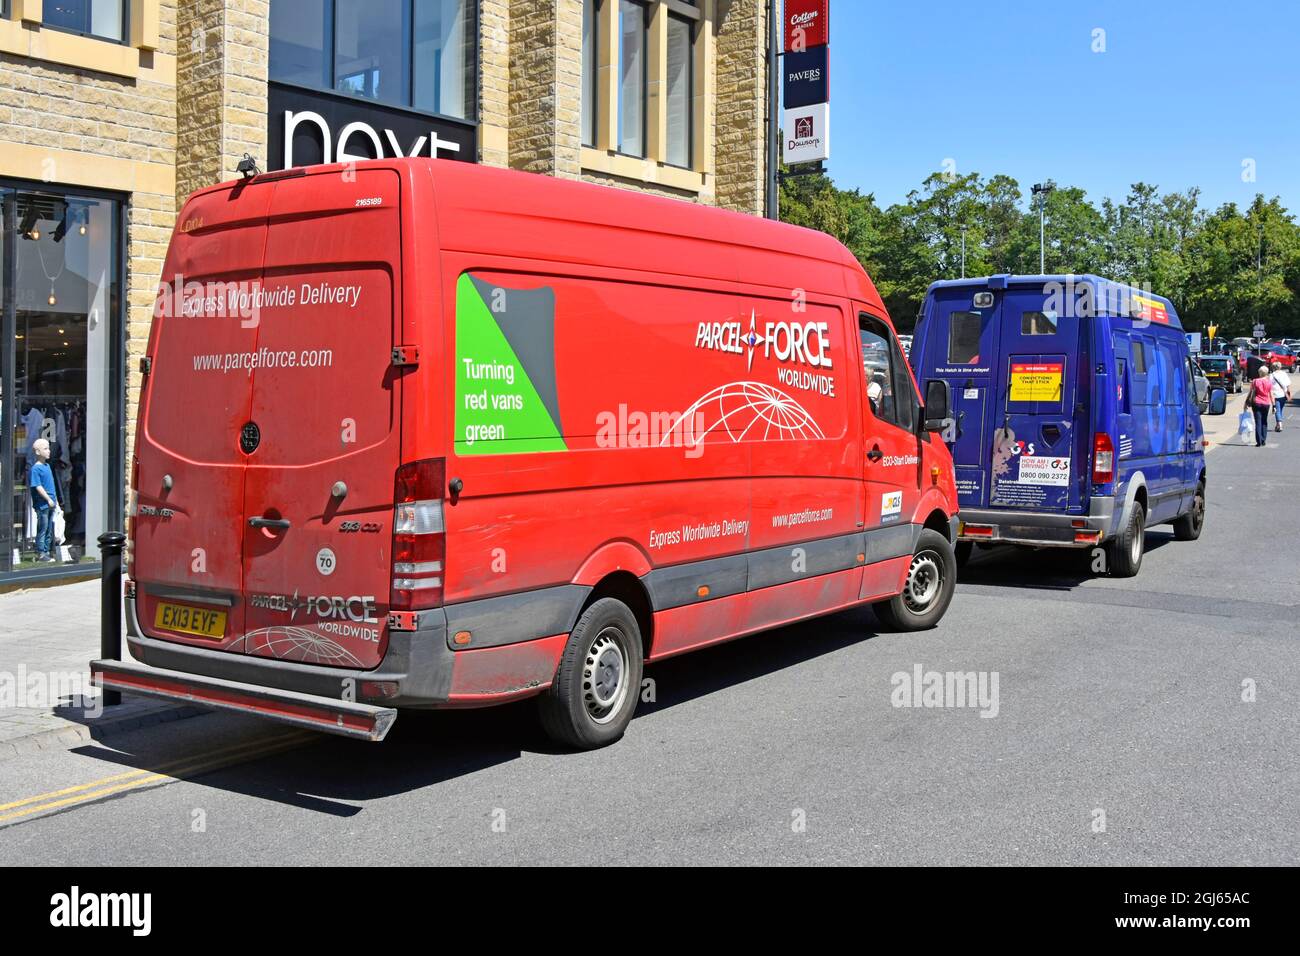 Red Parcel Force shop store supply chain Mercedes Sprinter delivery van &  blue G4S high value security transport Skipton North Yorkshire England UK  Stock Photo - Alamy